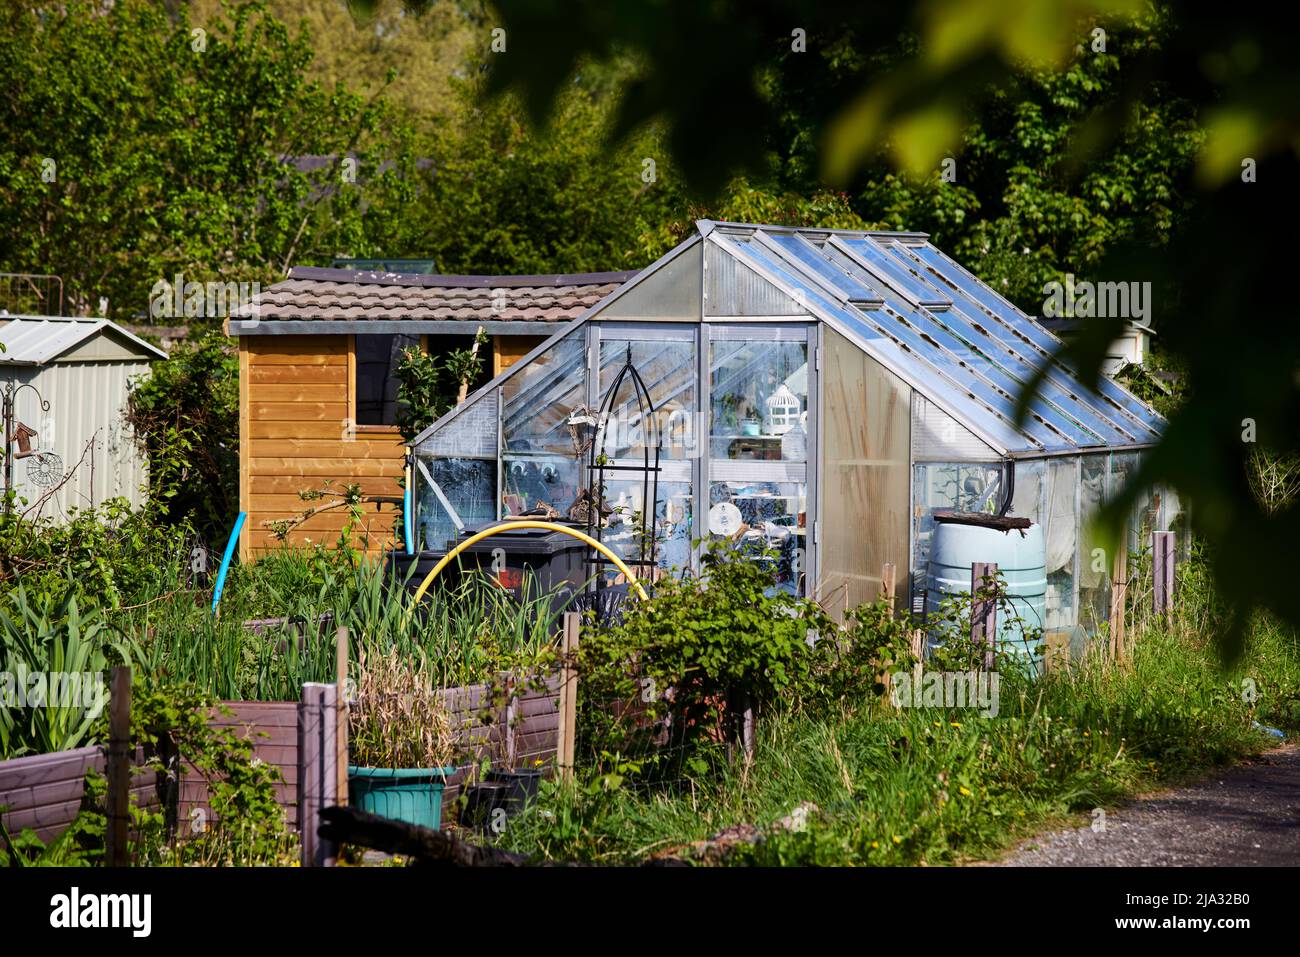 Abbey Hey Allotments, in Gorton, Manchester Stock Photo